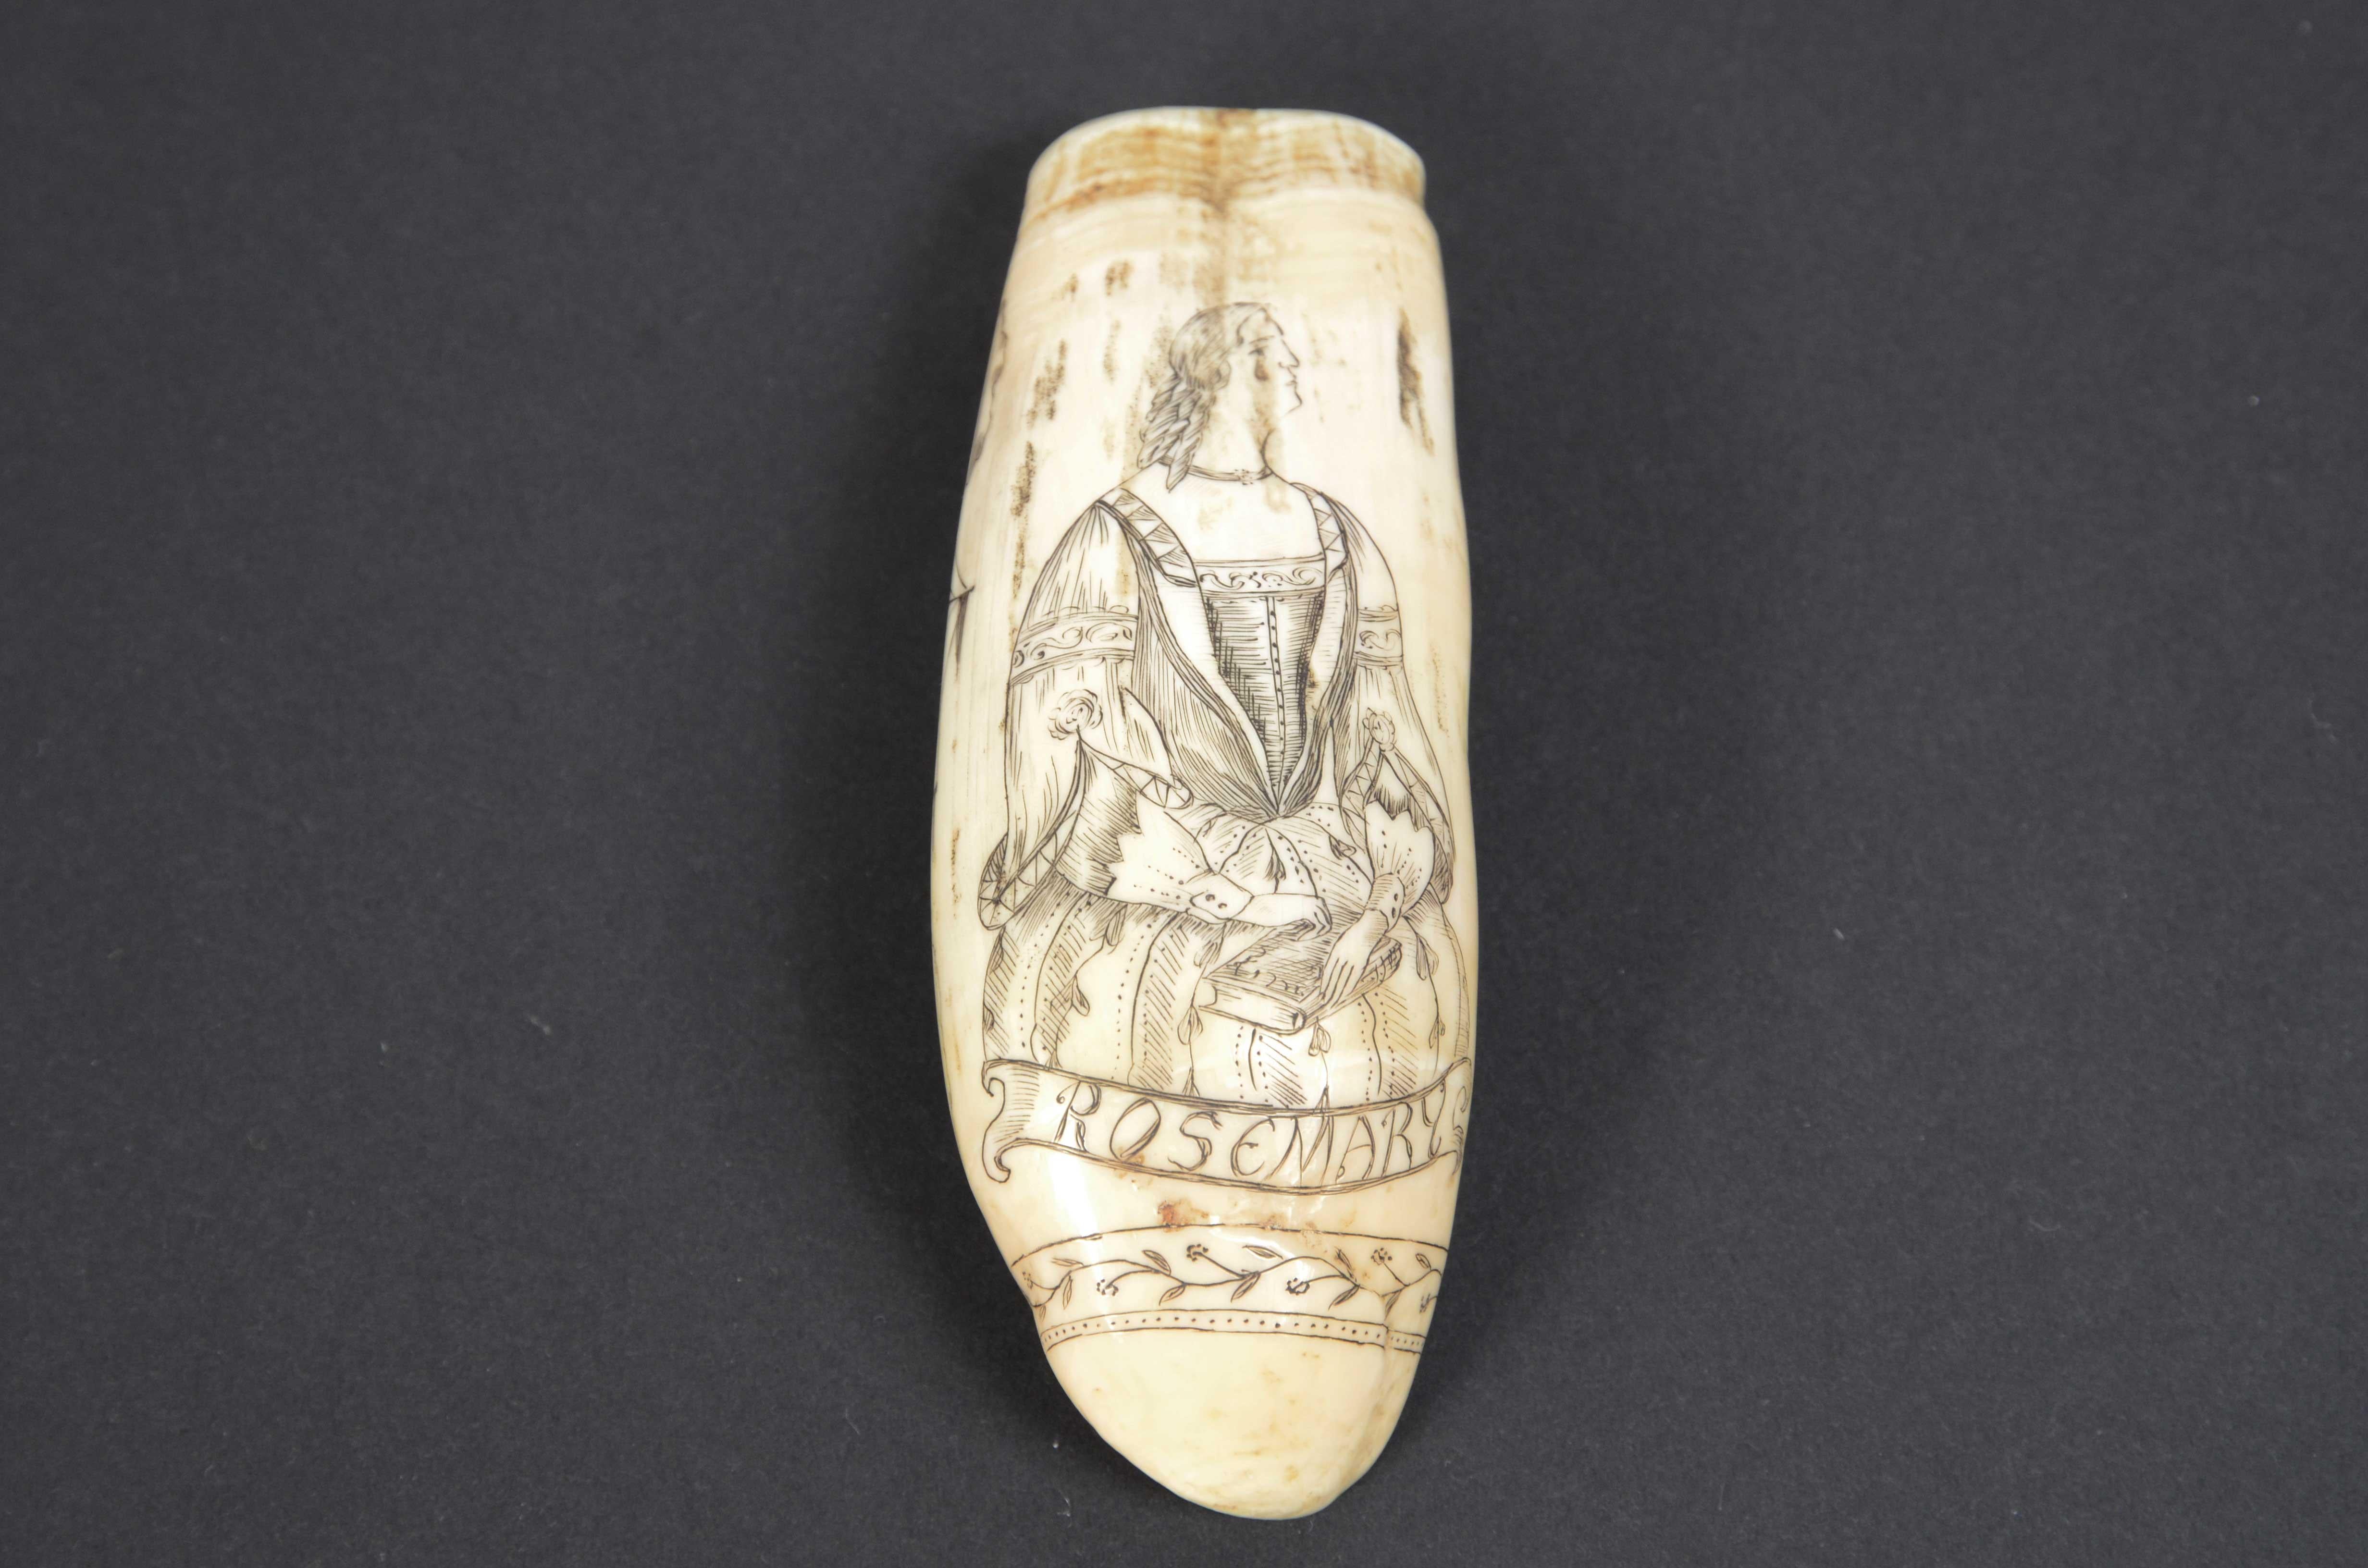 Scrimshaw of an engraved whale tooth, fine workmanship datable to around mid-19th century, length 11.7 cm, depicting whaler with men aboard, boat  rowing with 6 whalers one of them in act  of harpooning a whale  and three whales. On  back of the